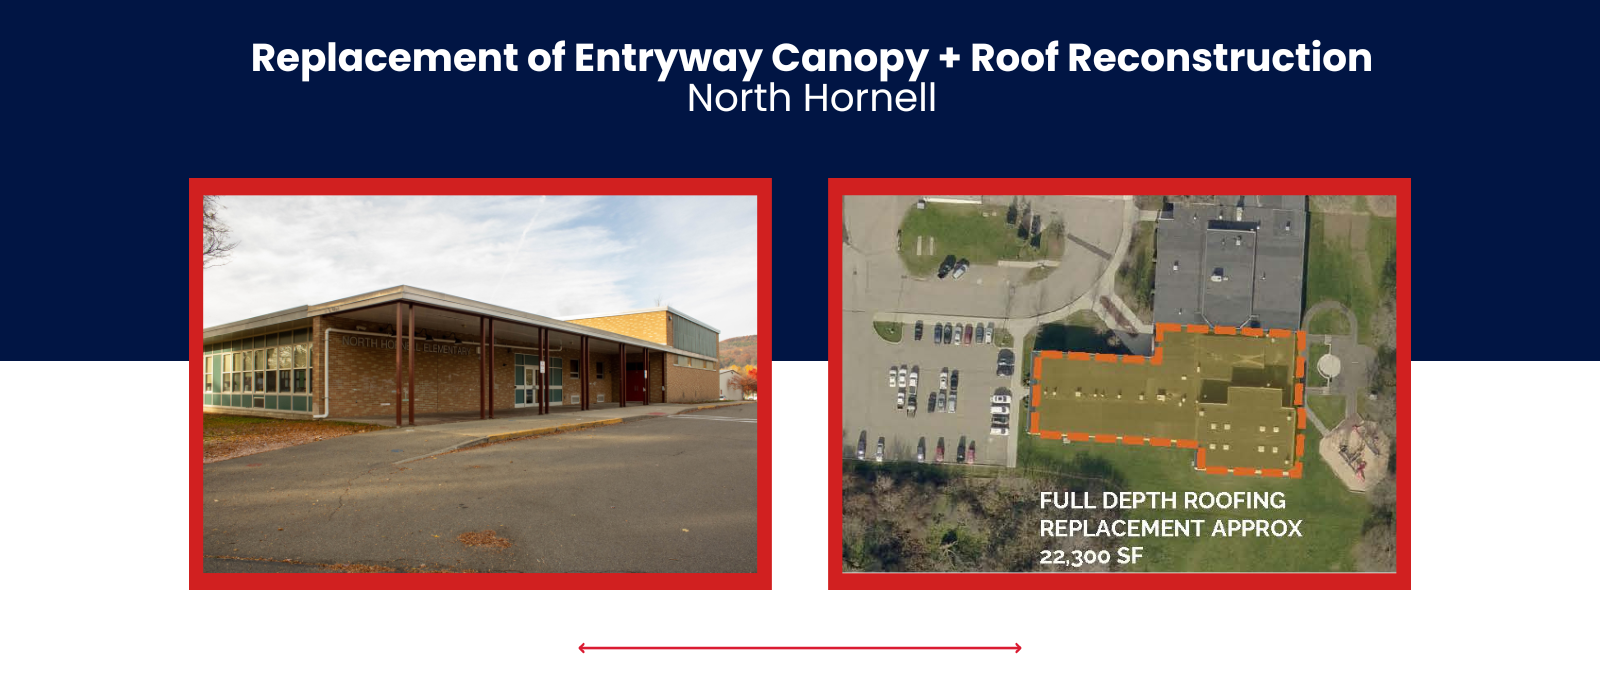 Replacement of Entryway Canopy + Roof Reconstruction
North Hornell